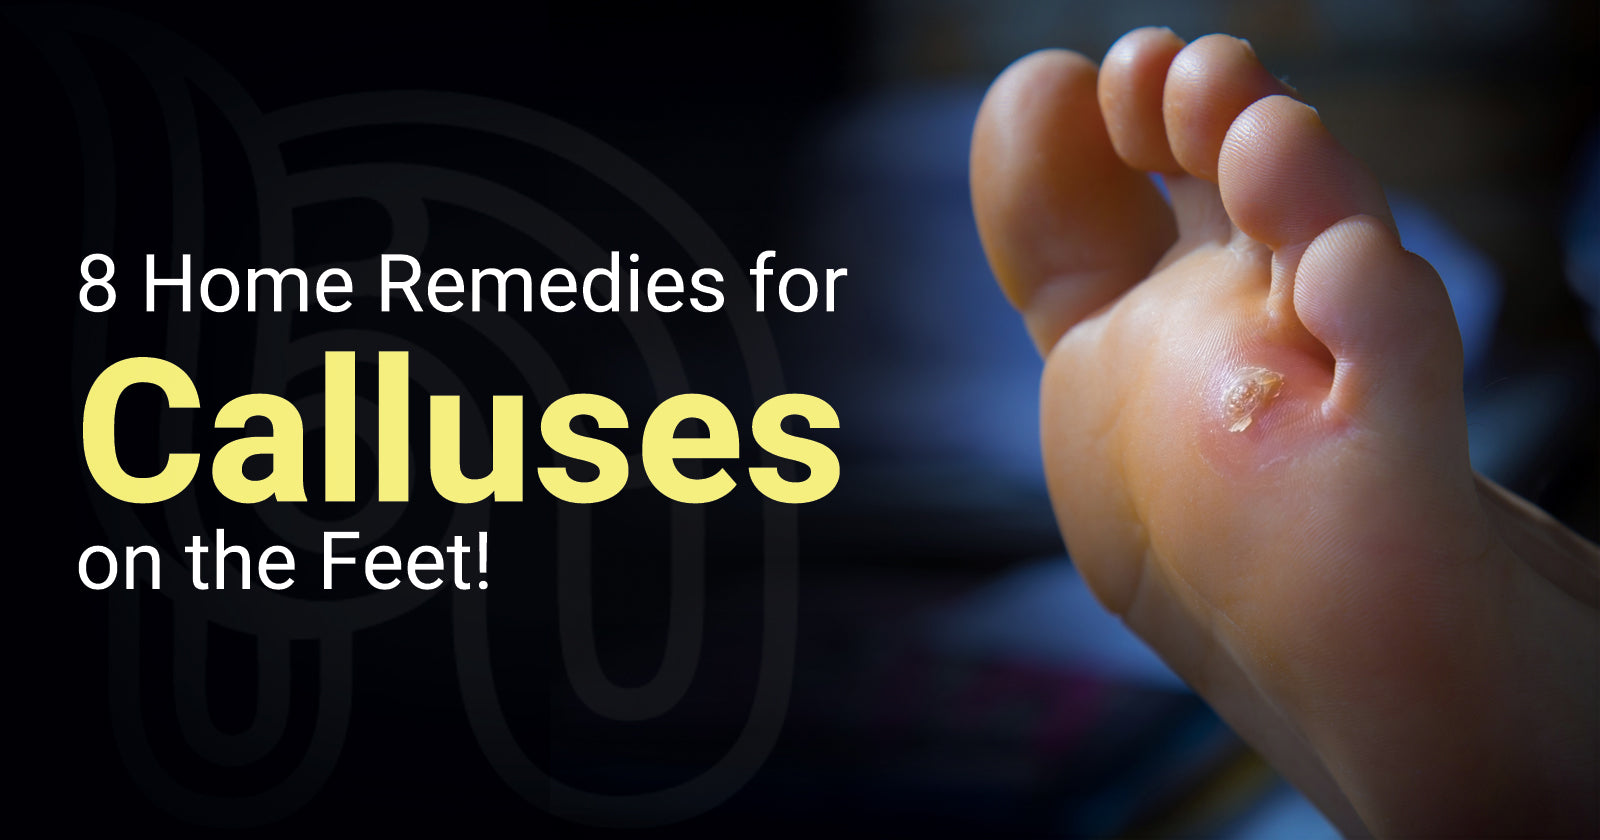 Home Remedies for Calluses on the Feet 